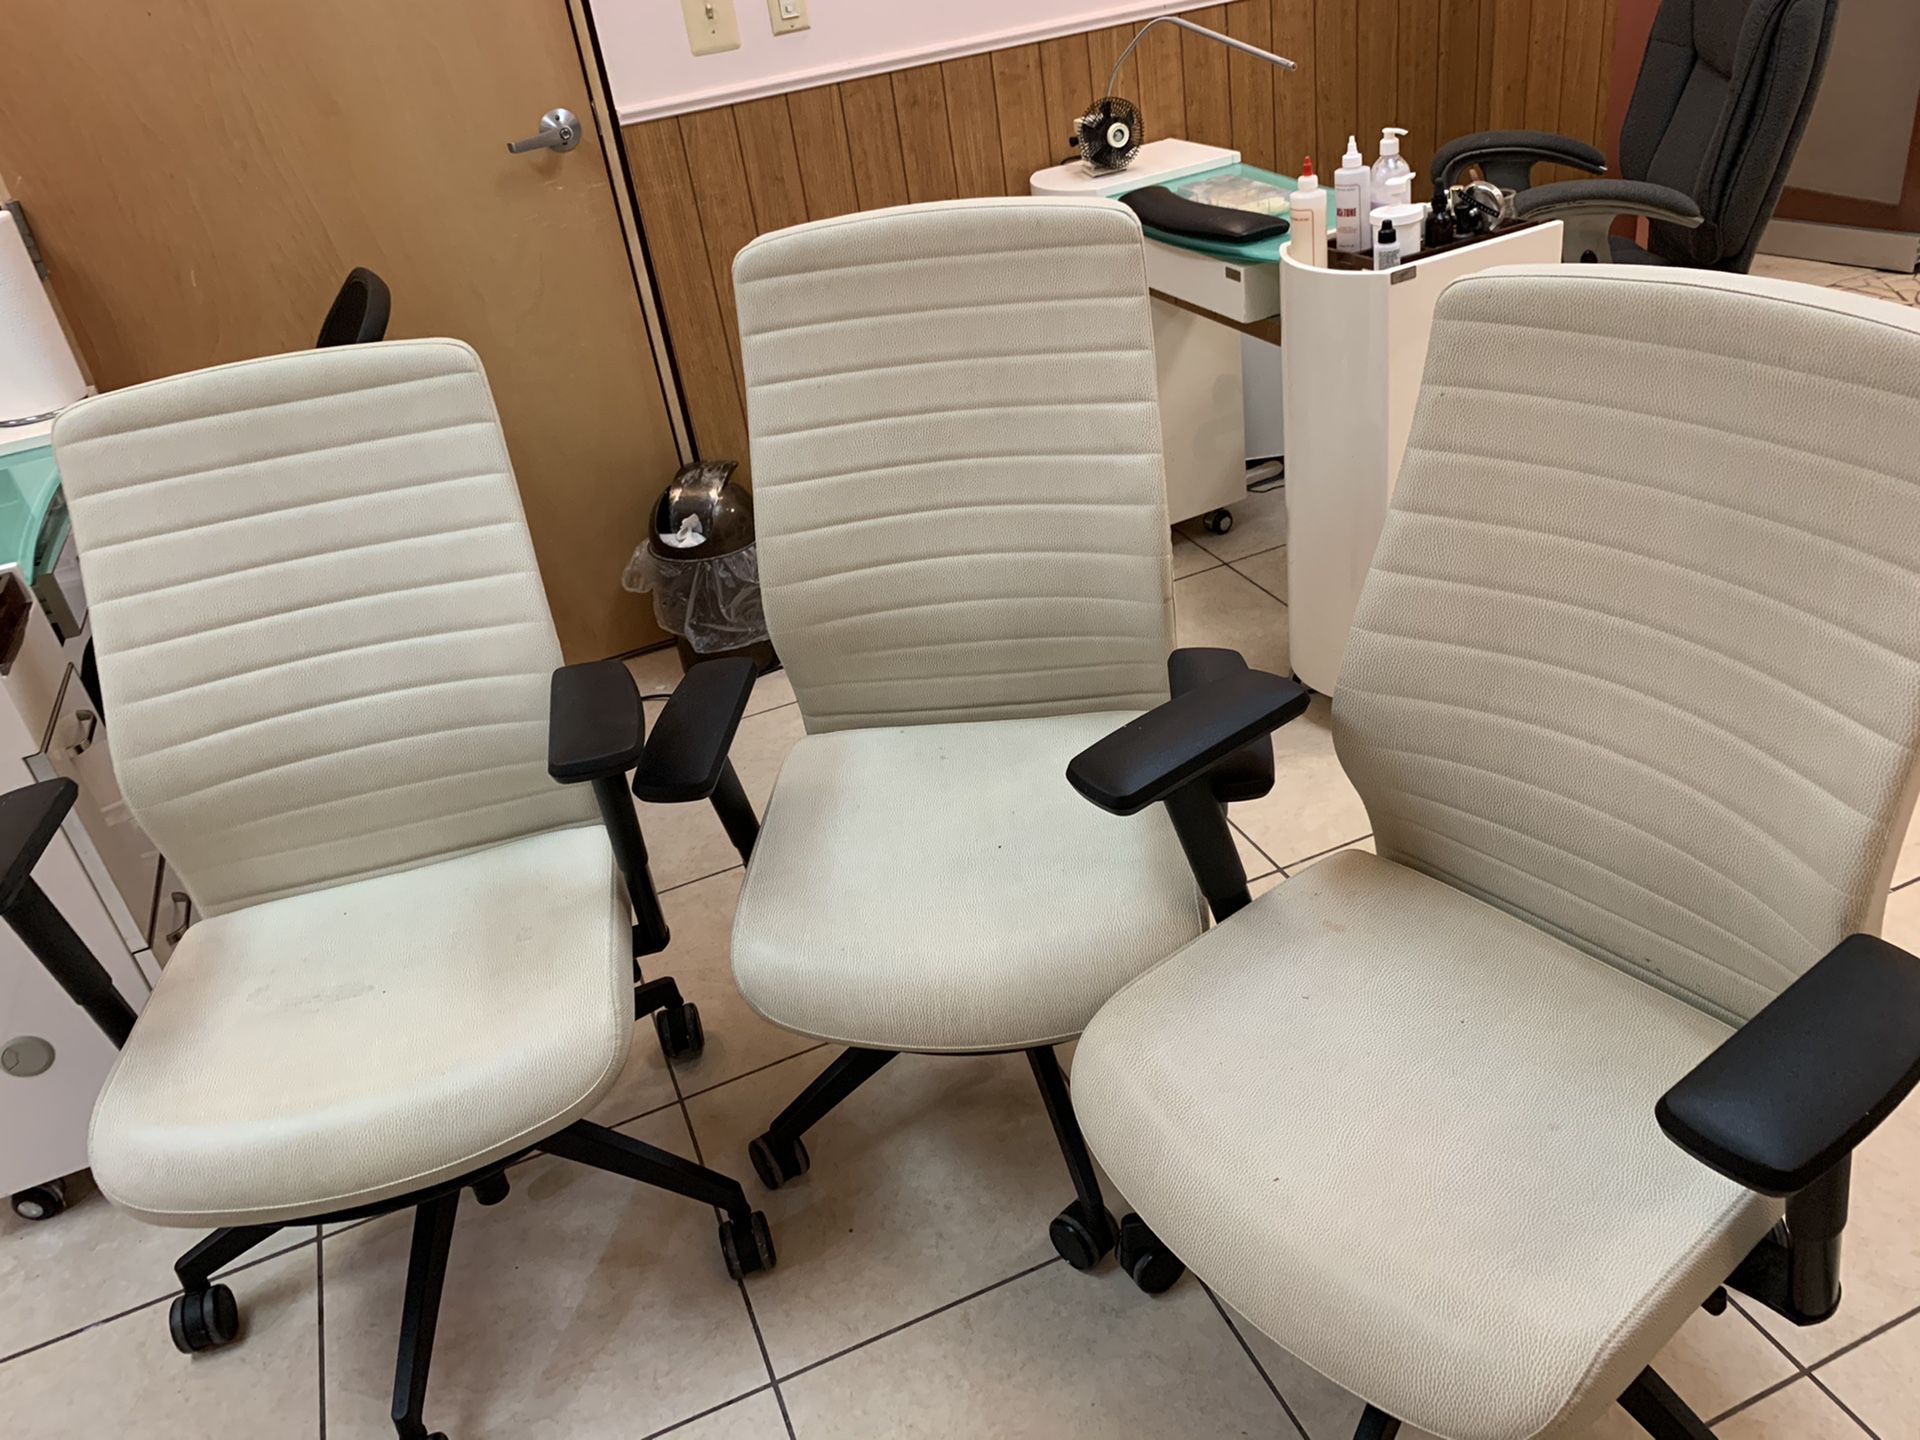 3 white office chairs